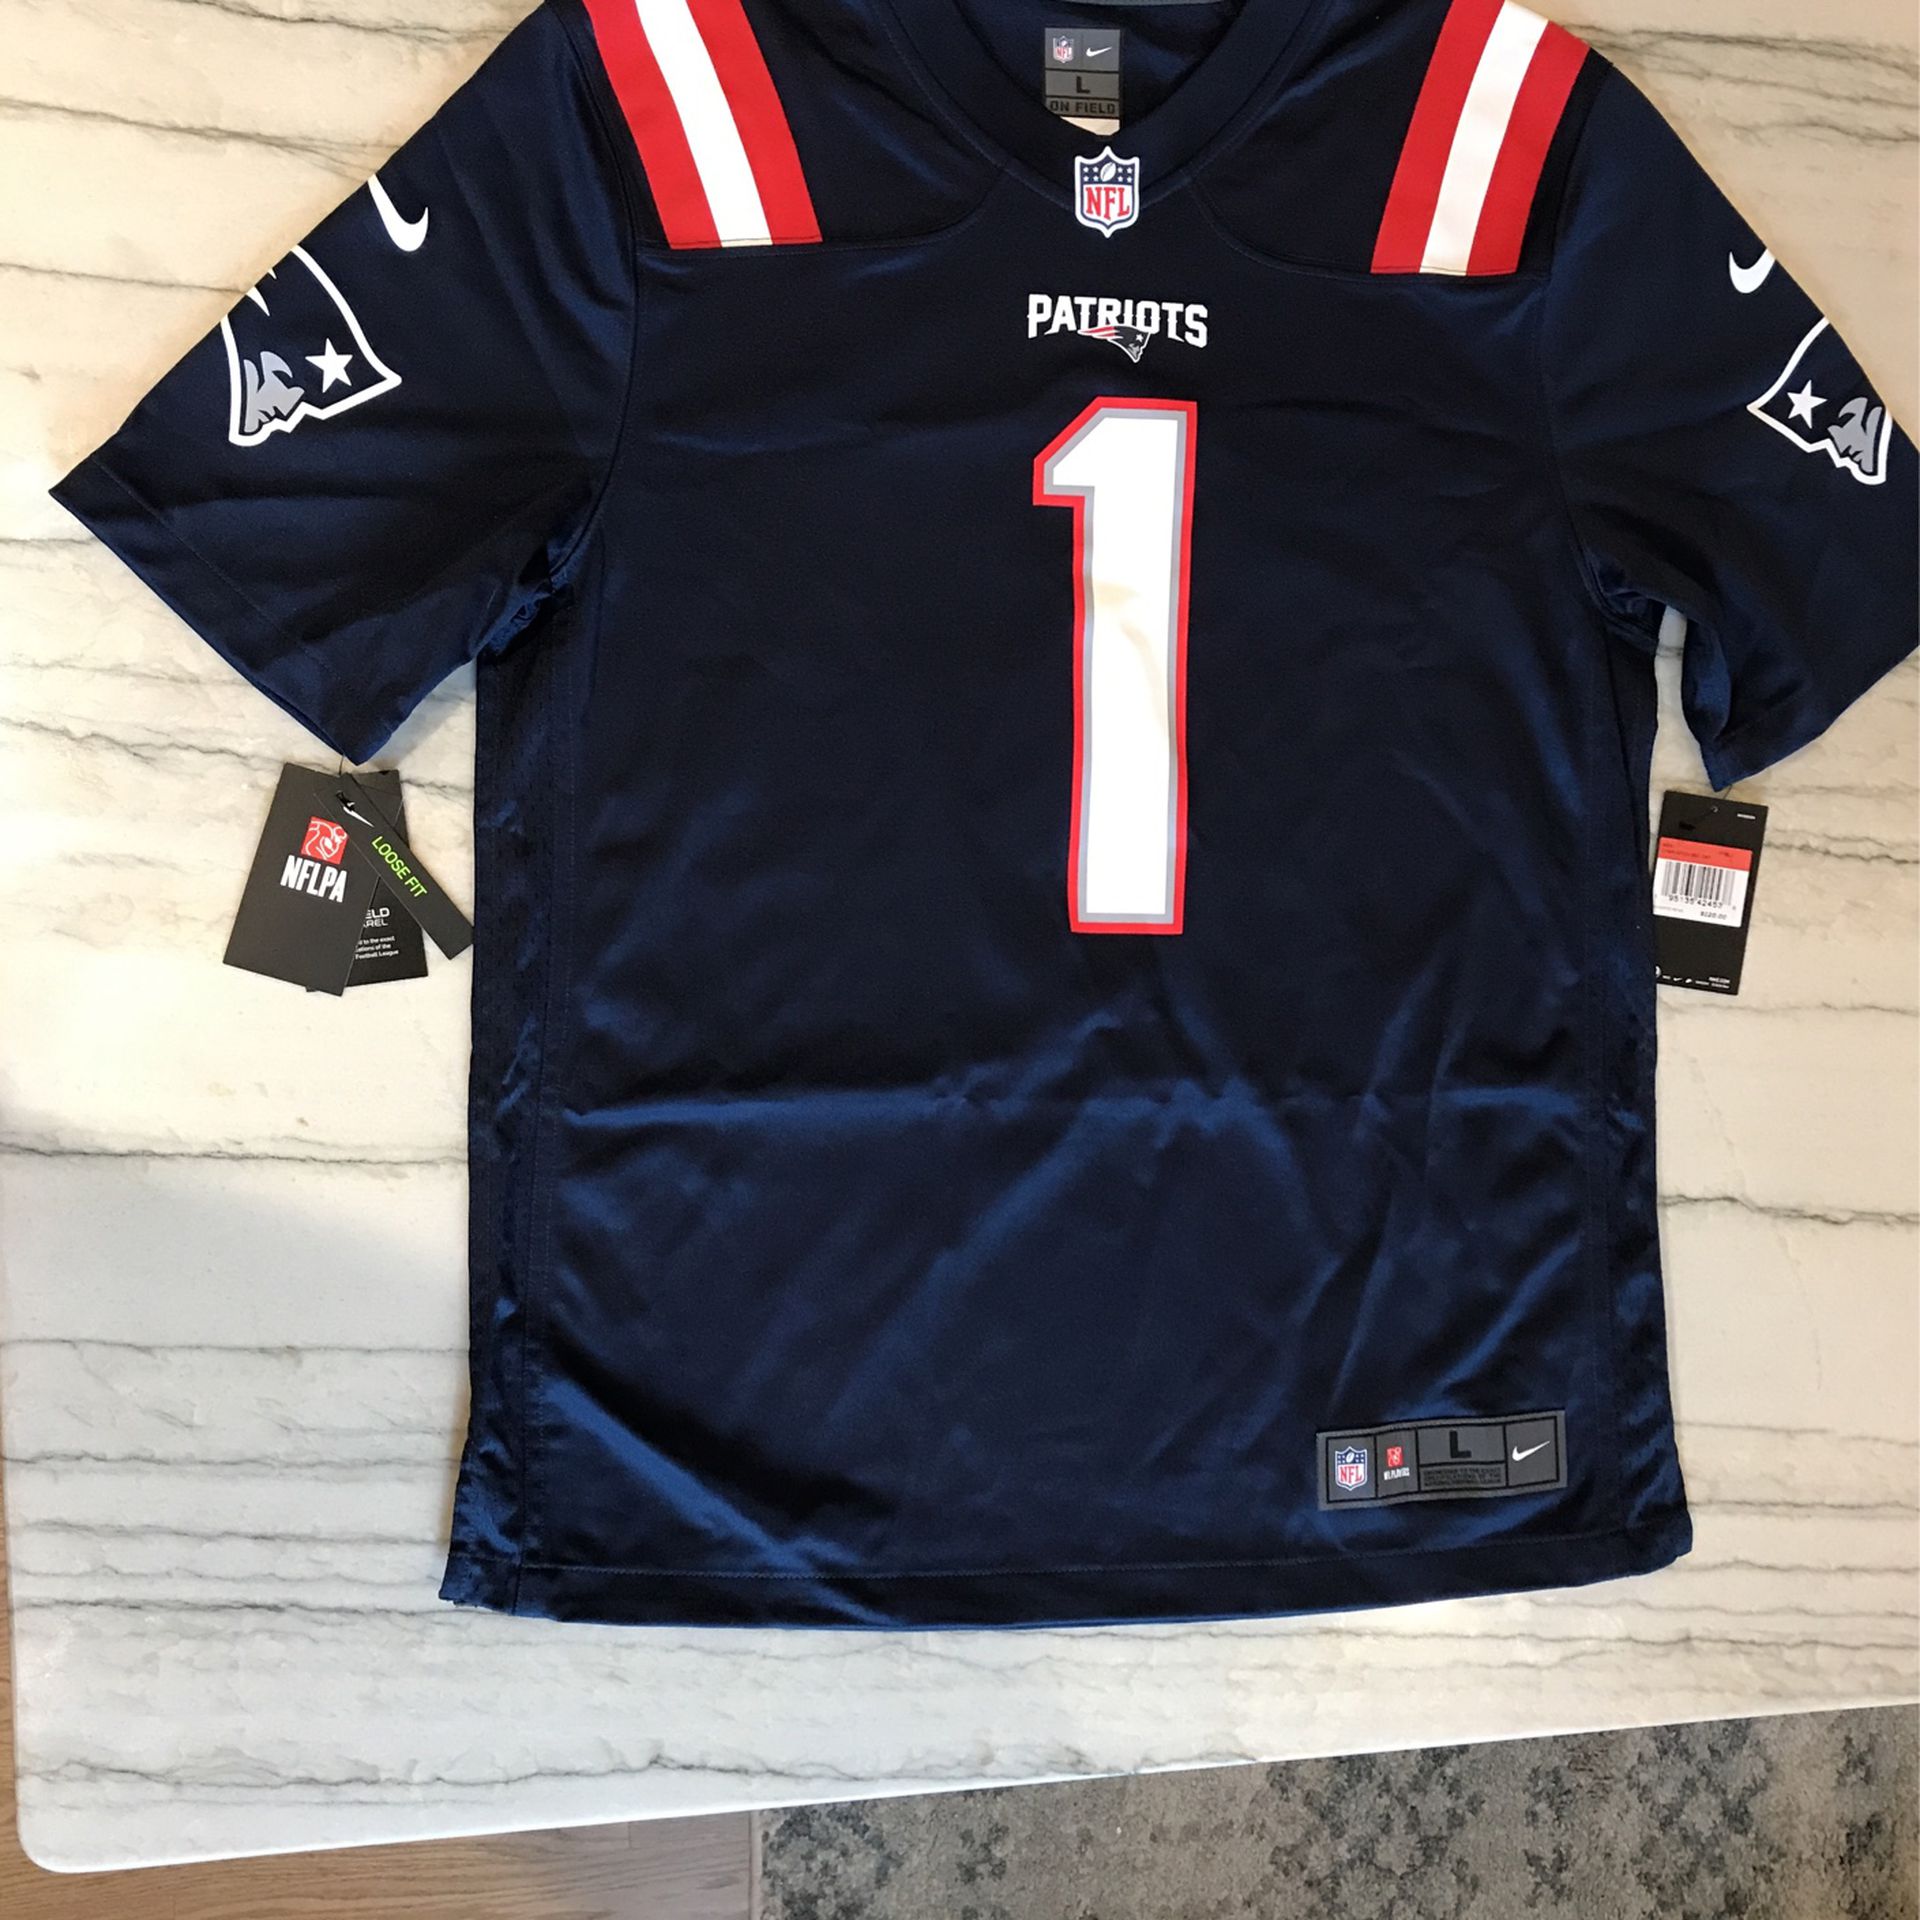 Official Patriots Jersey, L, $120, New W/ tags 